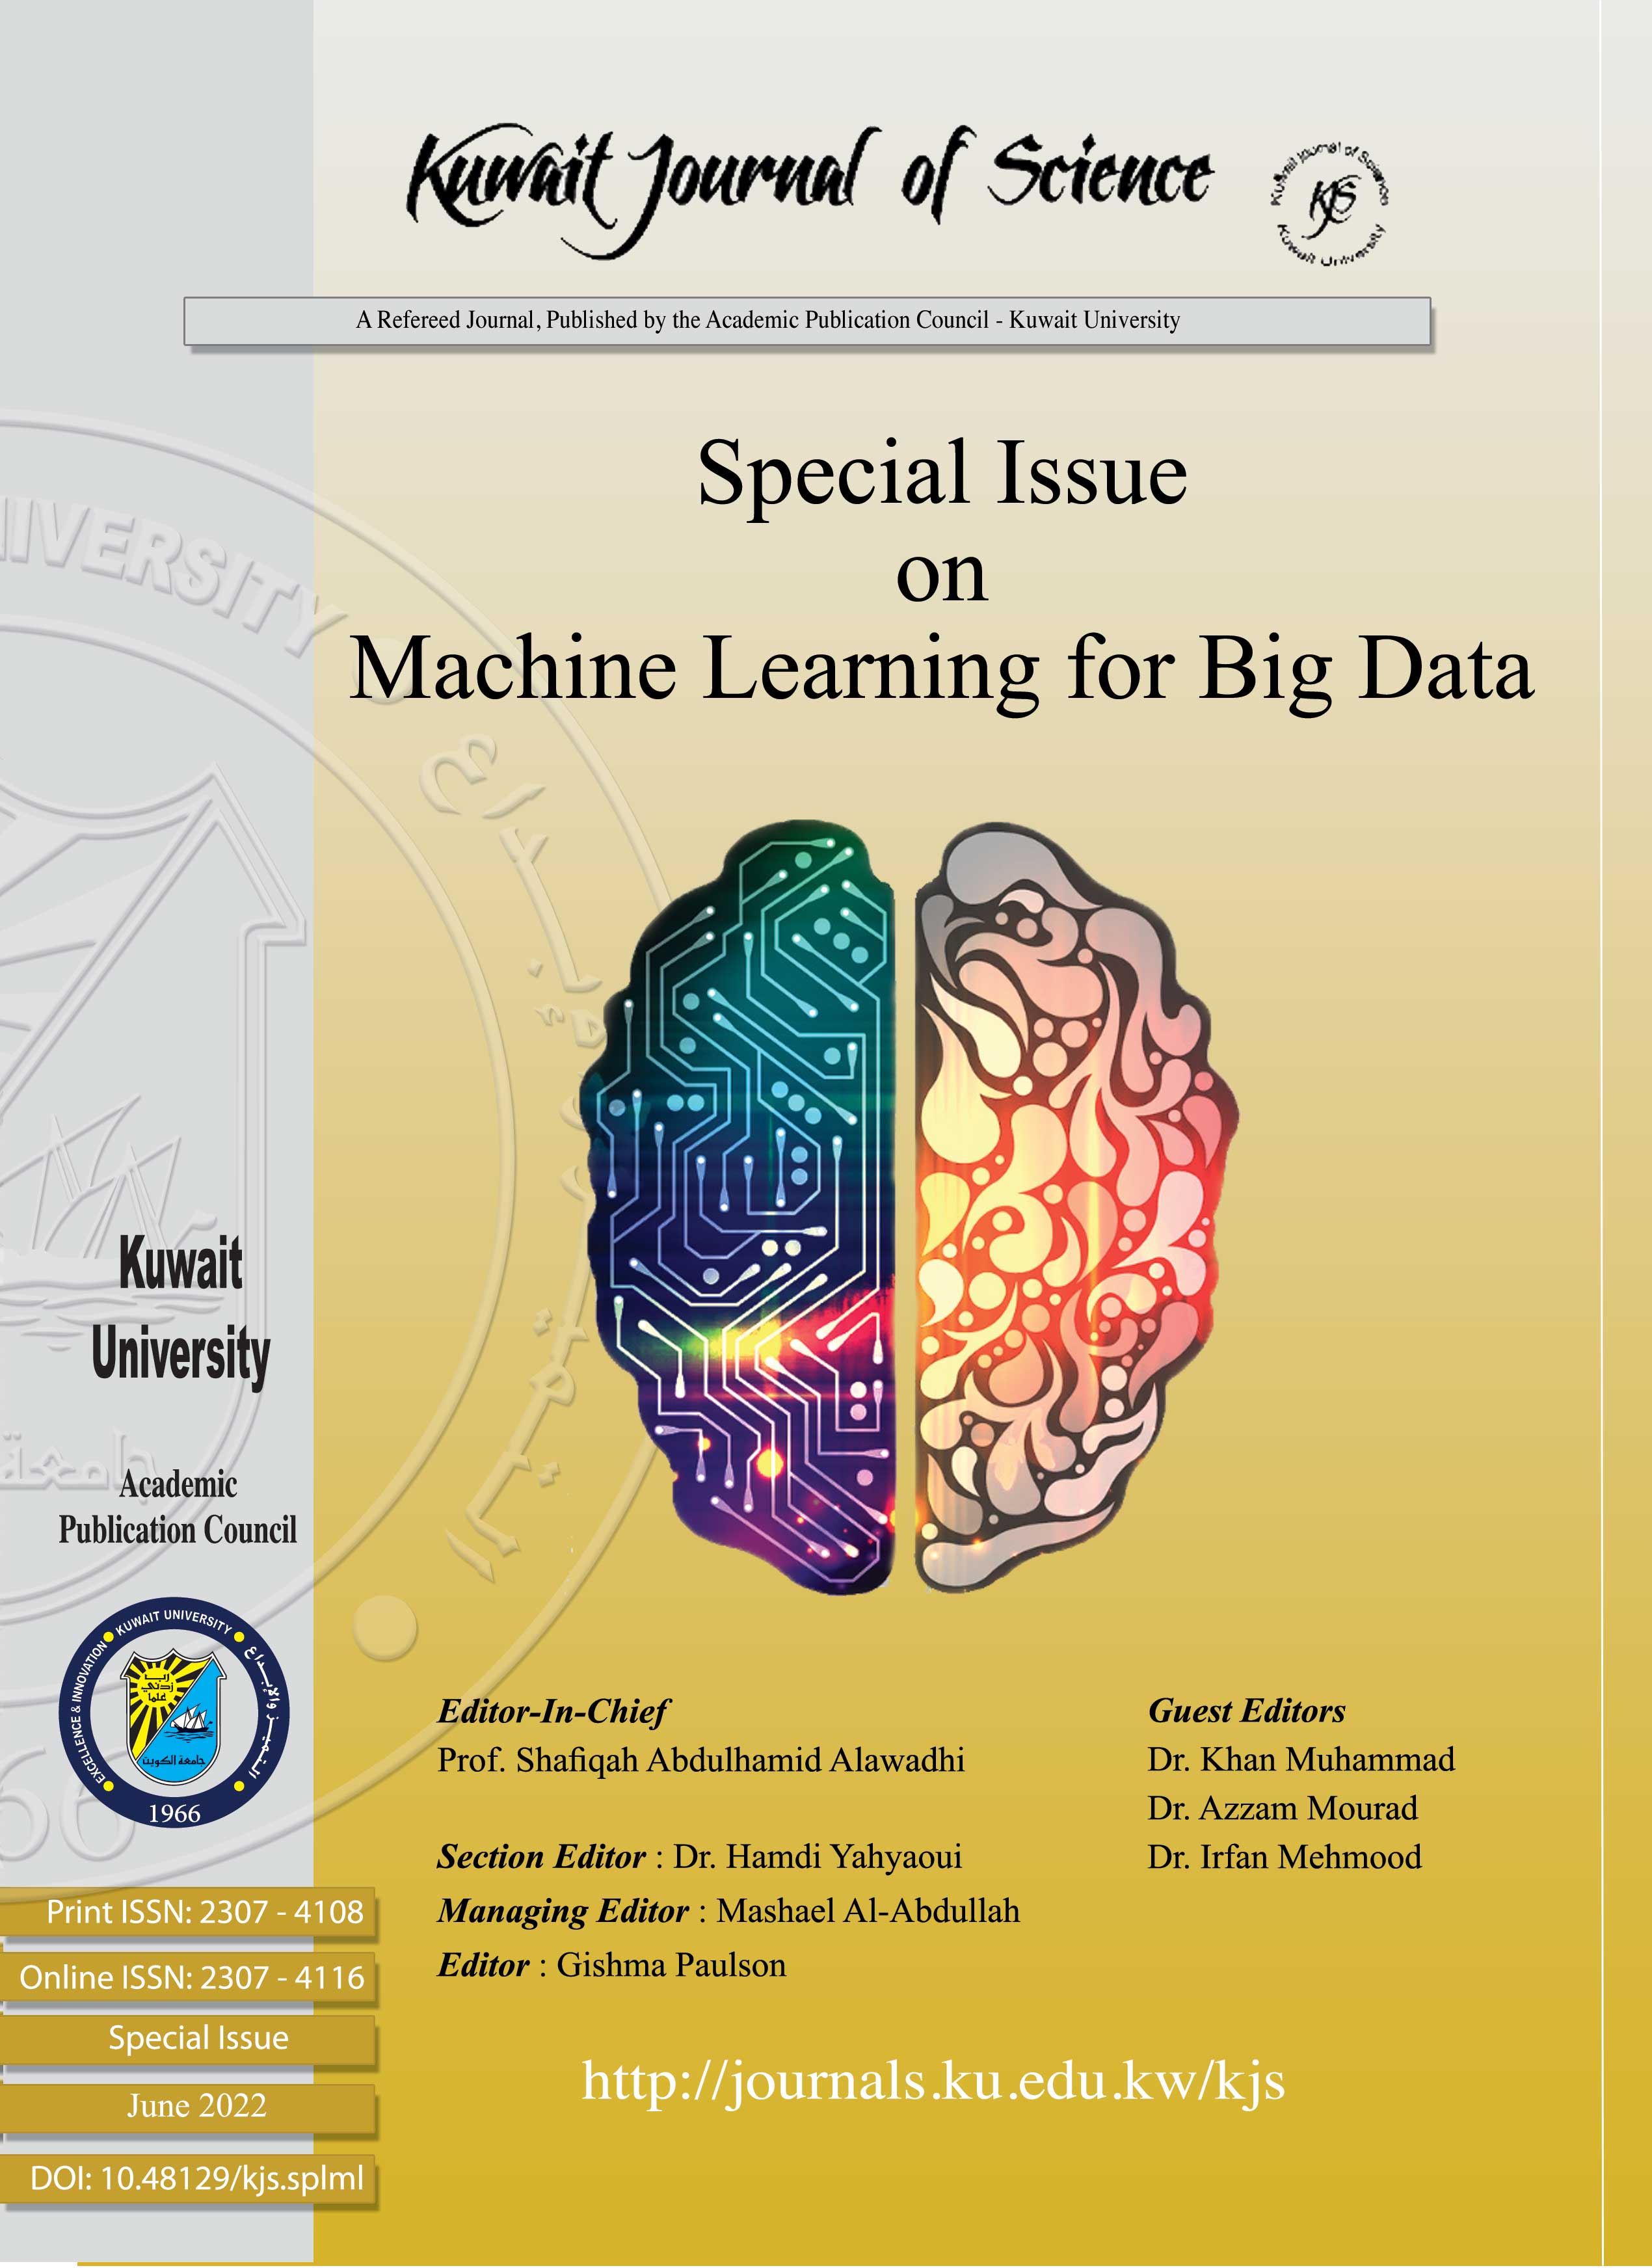 					View 2022: KJS-Special Issue On Machine Learning for Big Data
				